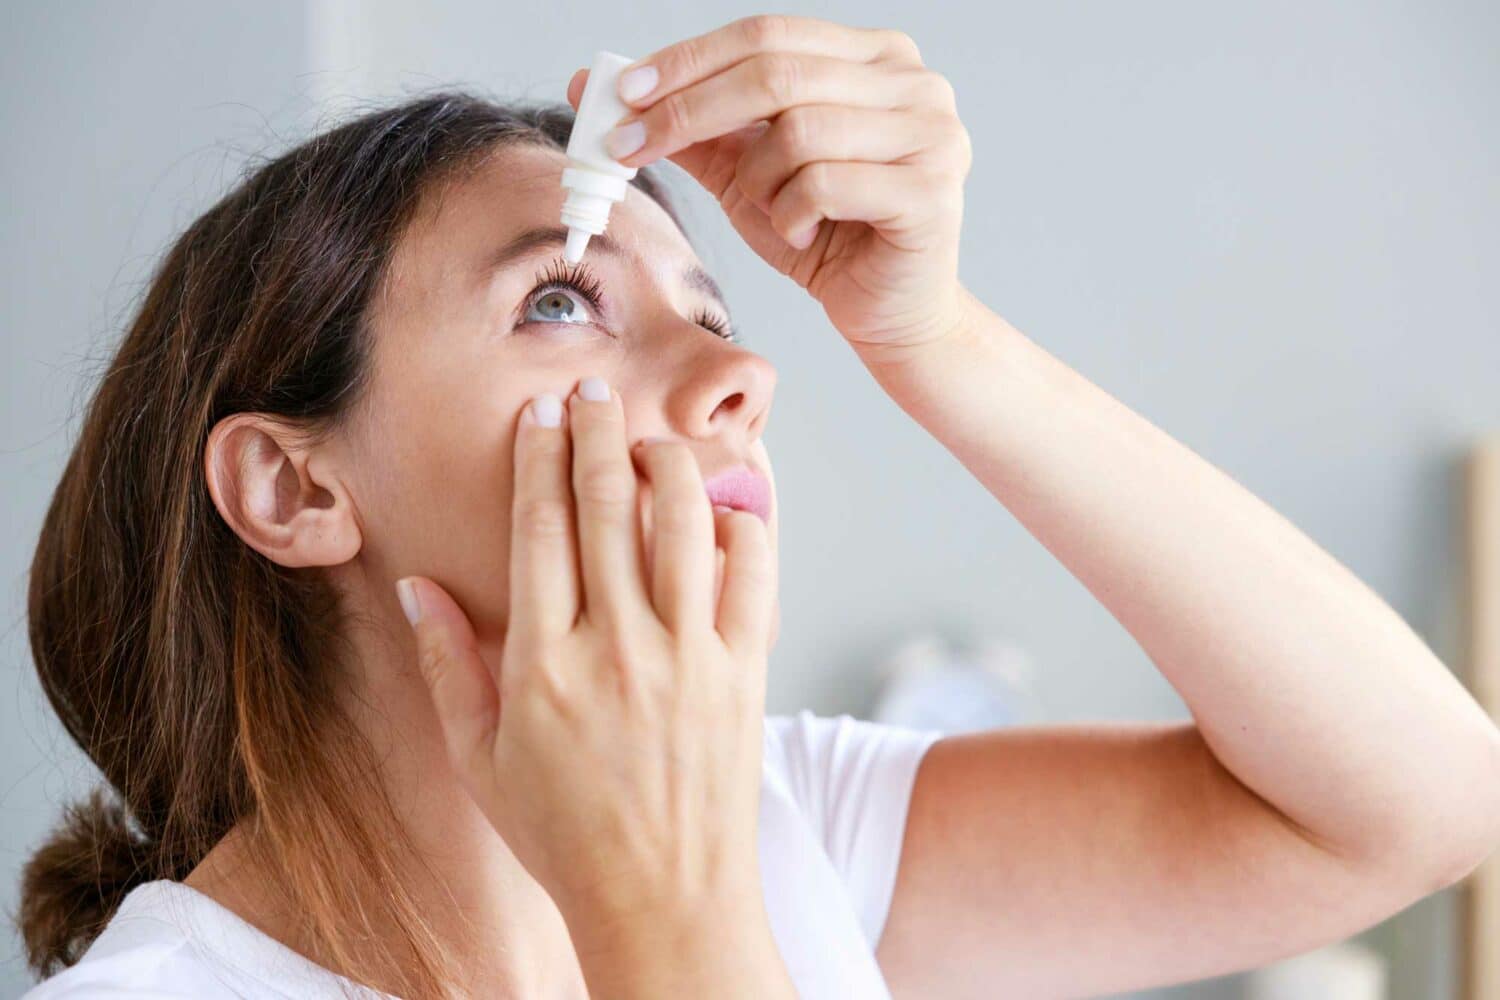 FDA Issues Warning to Avoid Purchase or Use of 26 Eyedrops Products from Several Major Brands due to Risk of Eye Infection